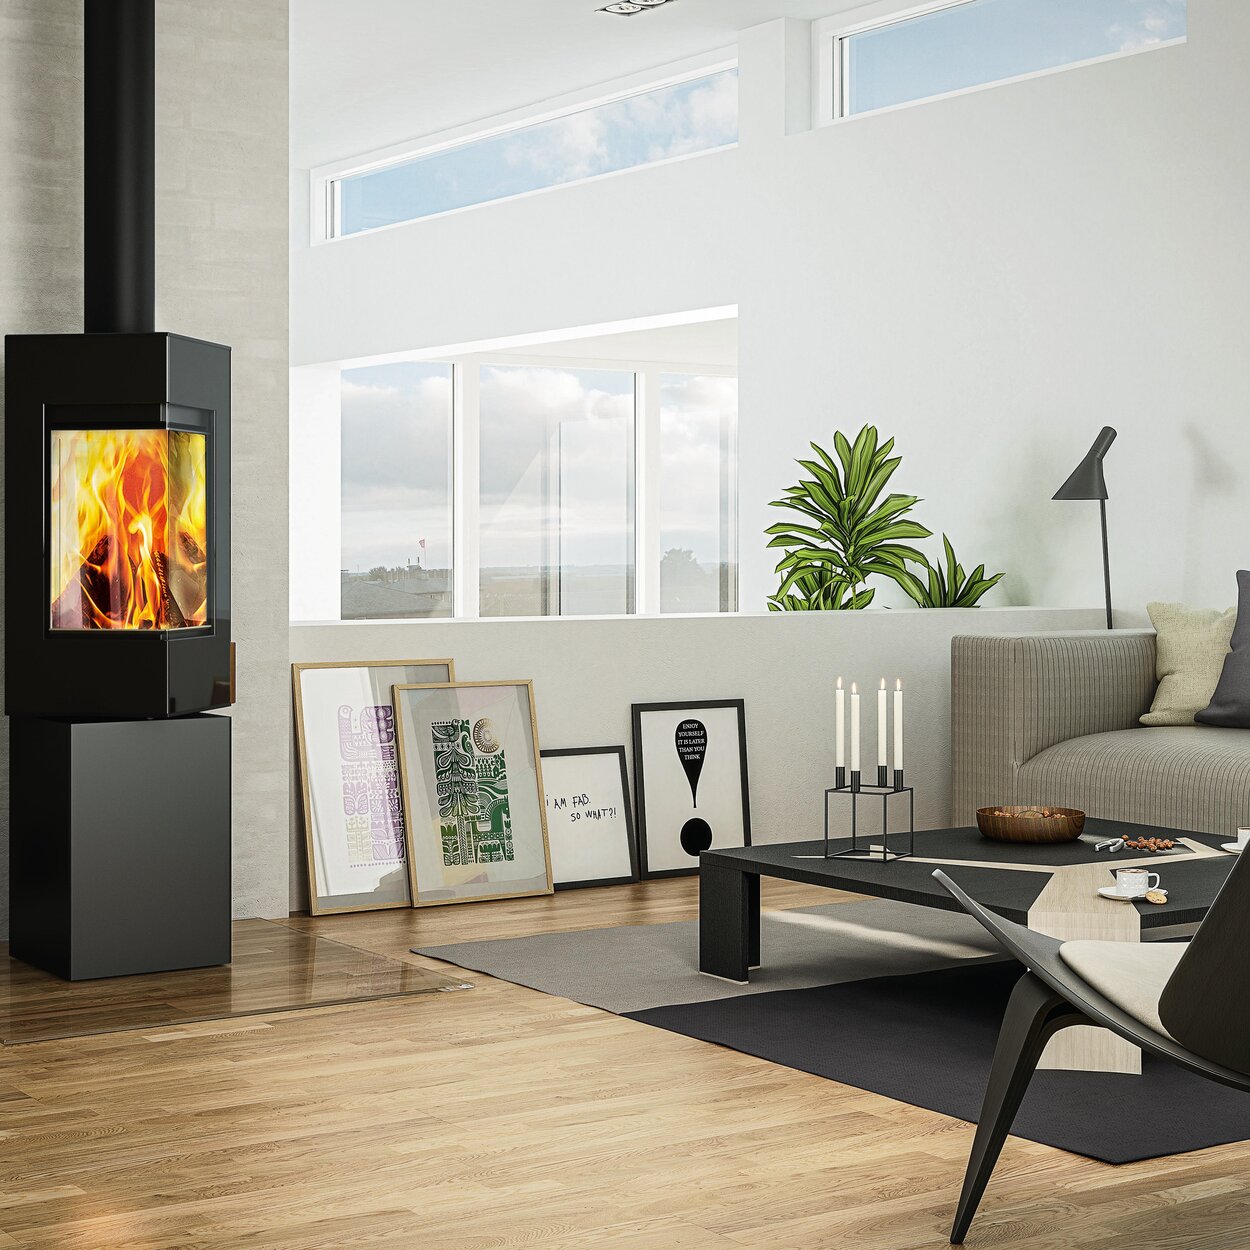 Wood stove Q-BE in black with steel door with large fire in modern country home